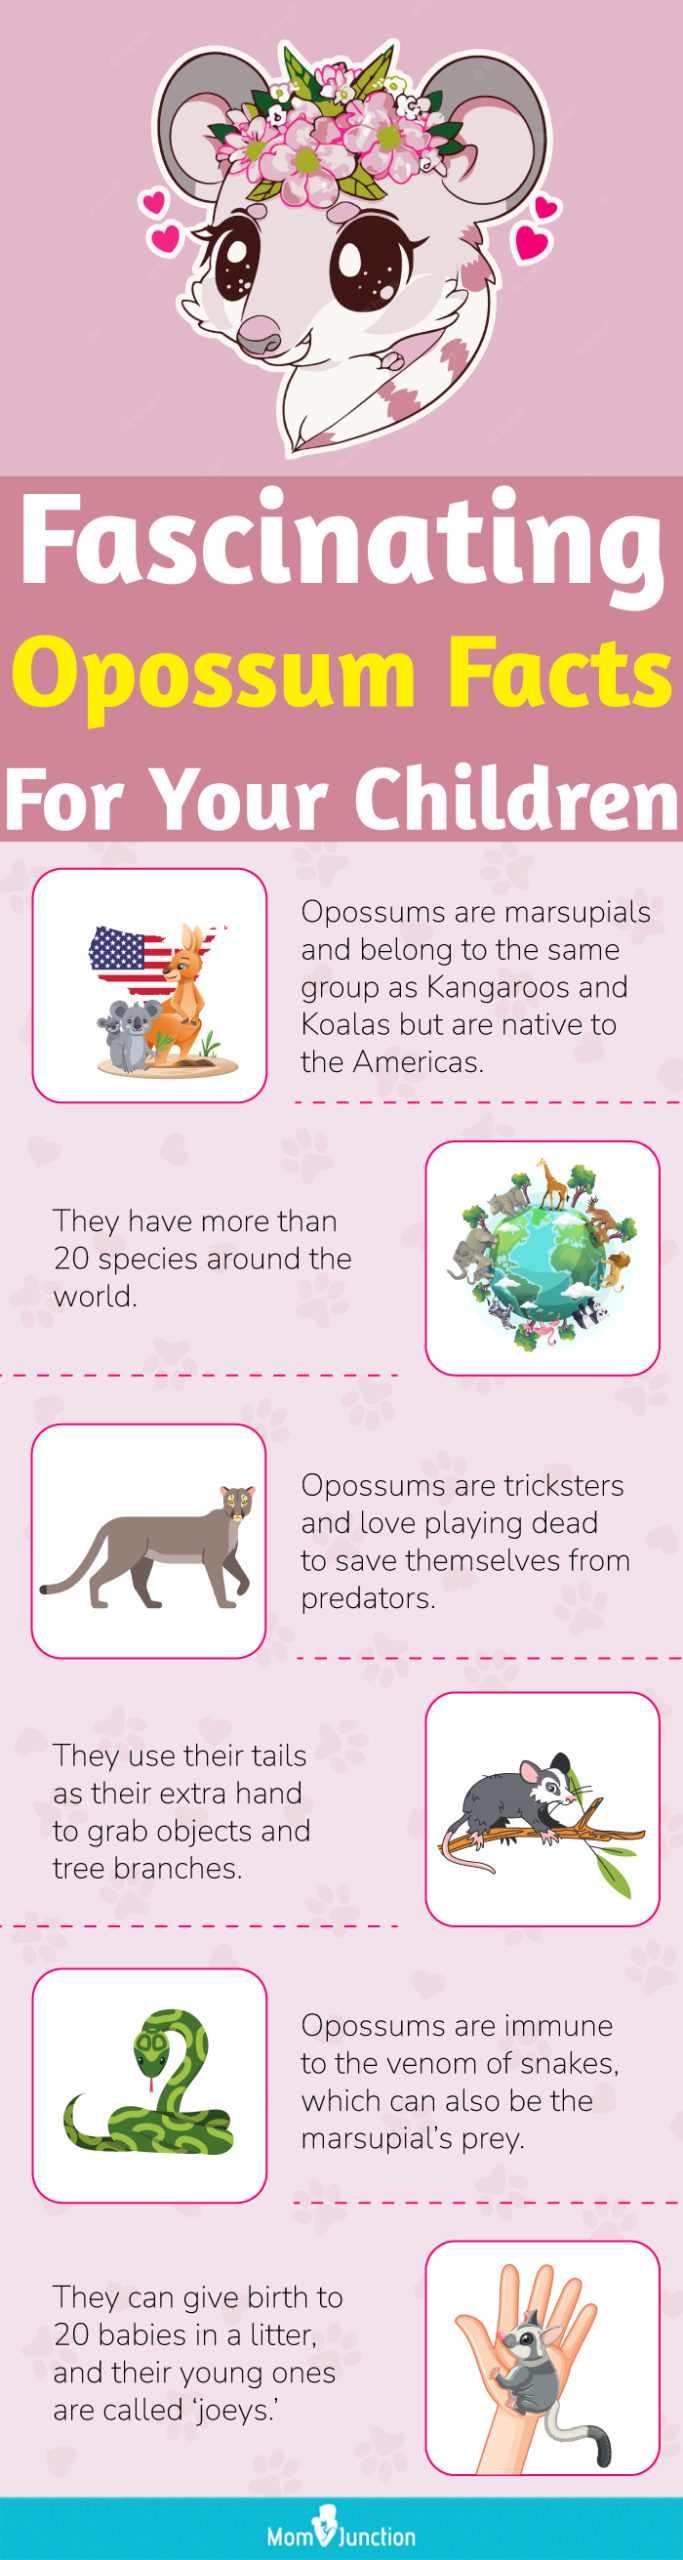 fascinating opossum facts for your children (infographic)